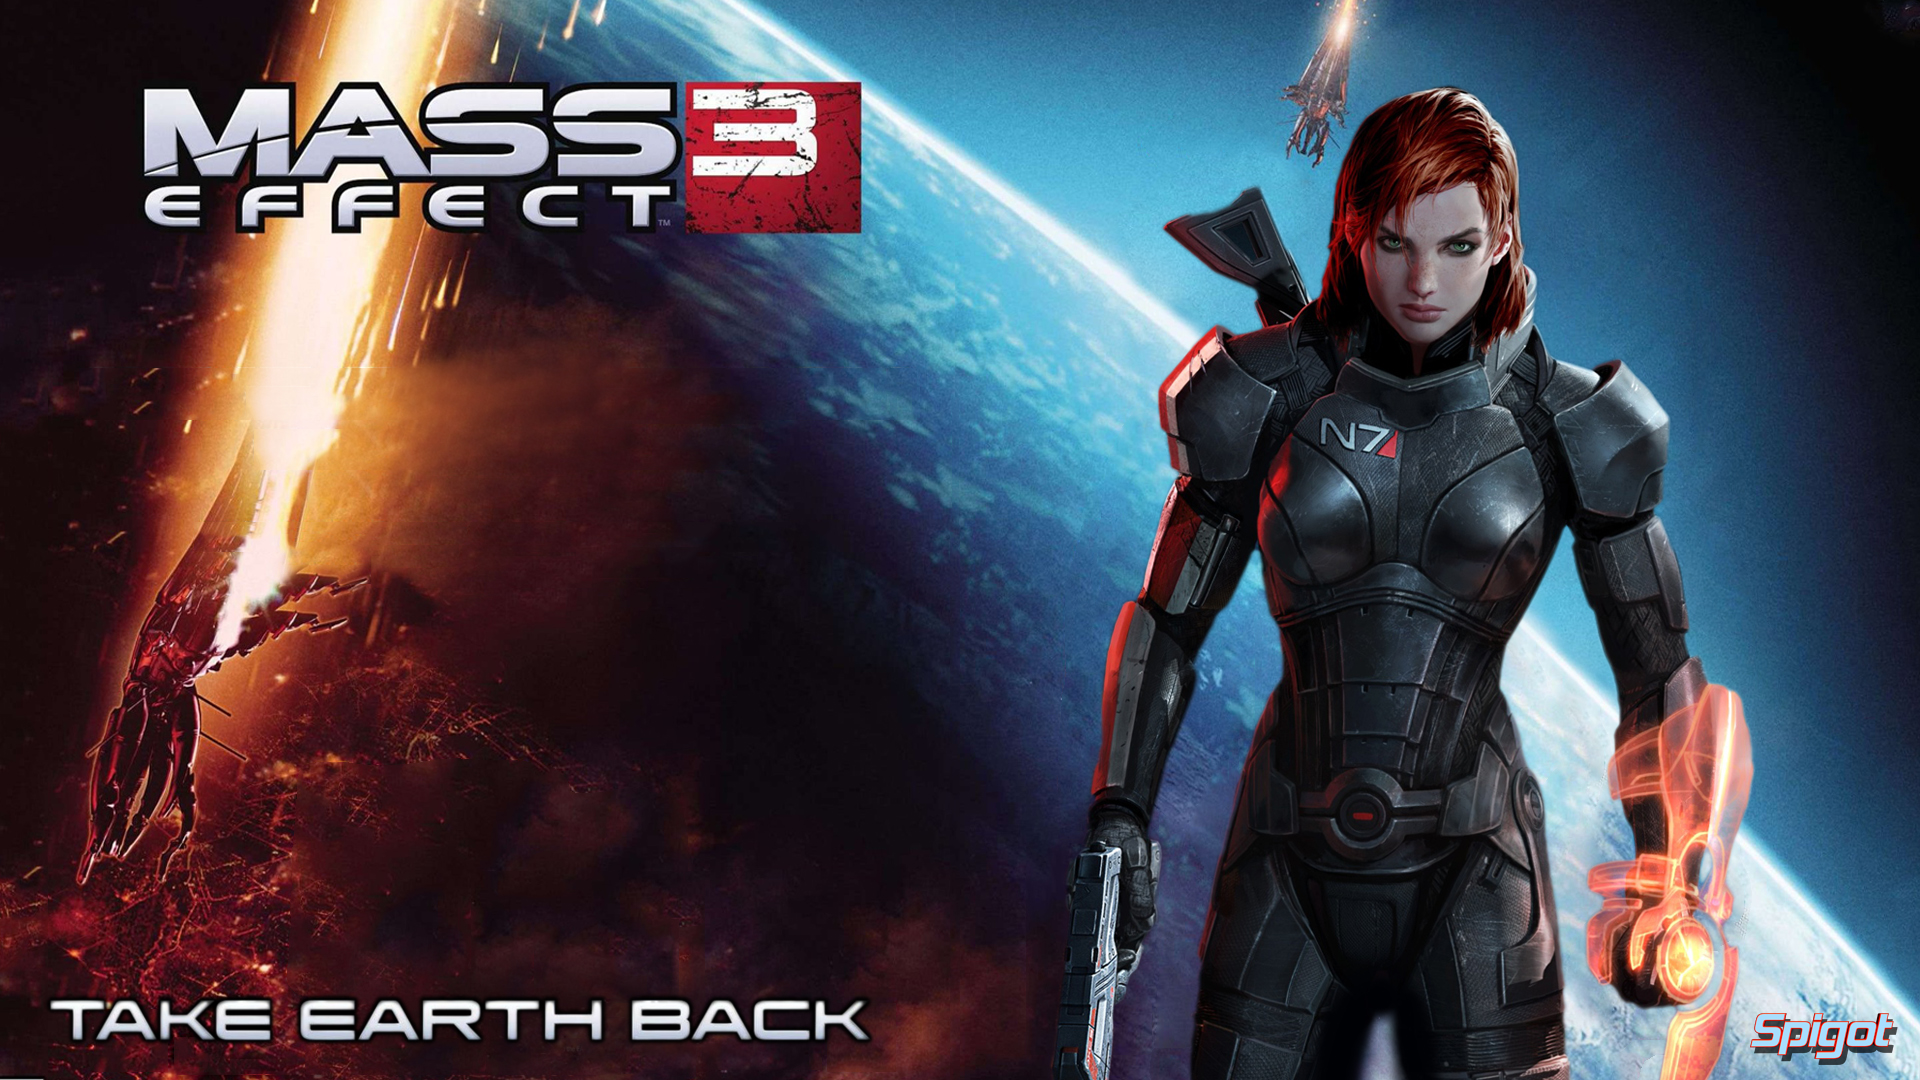 Make A Mass Effect Wallpaper So I Made In Between Playing This